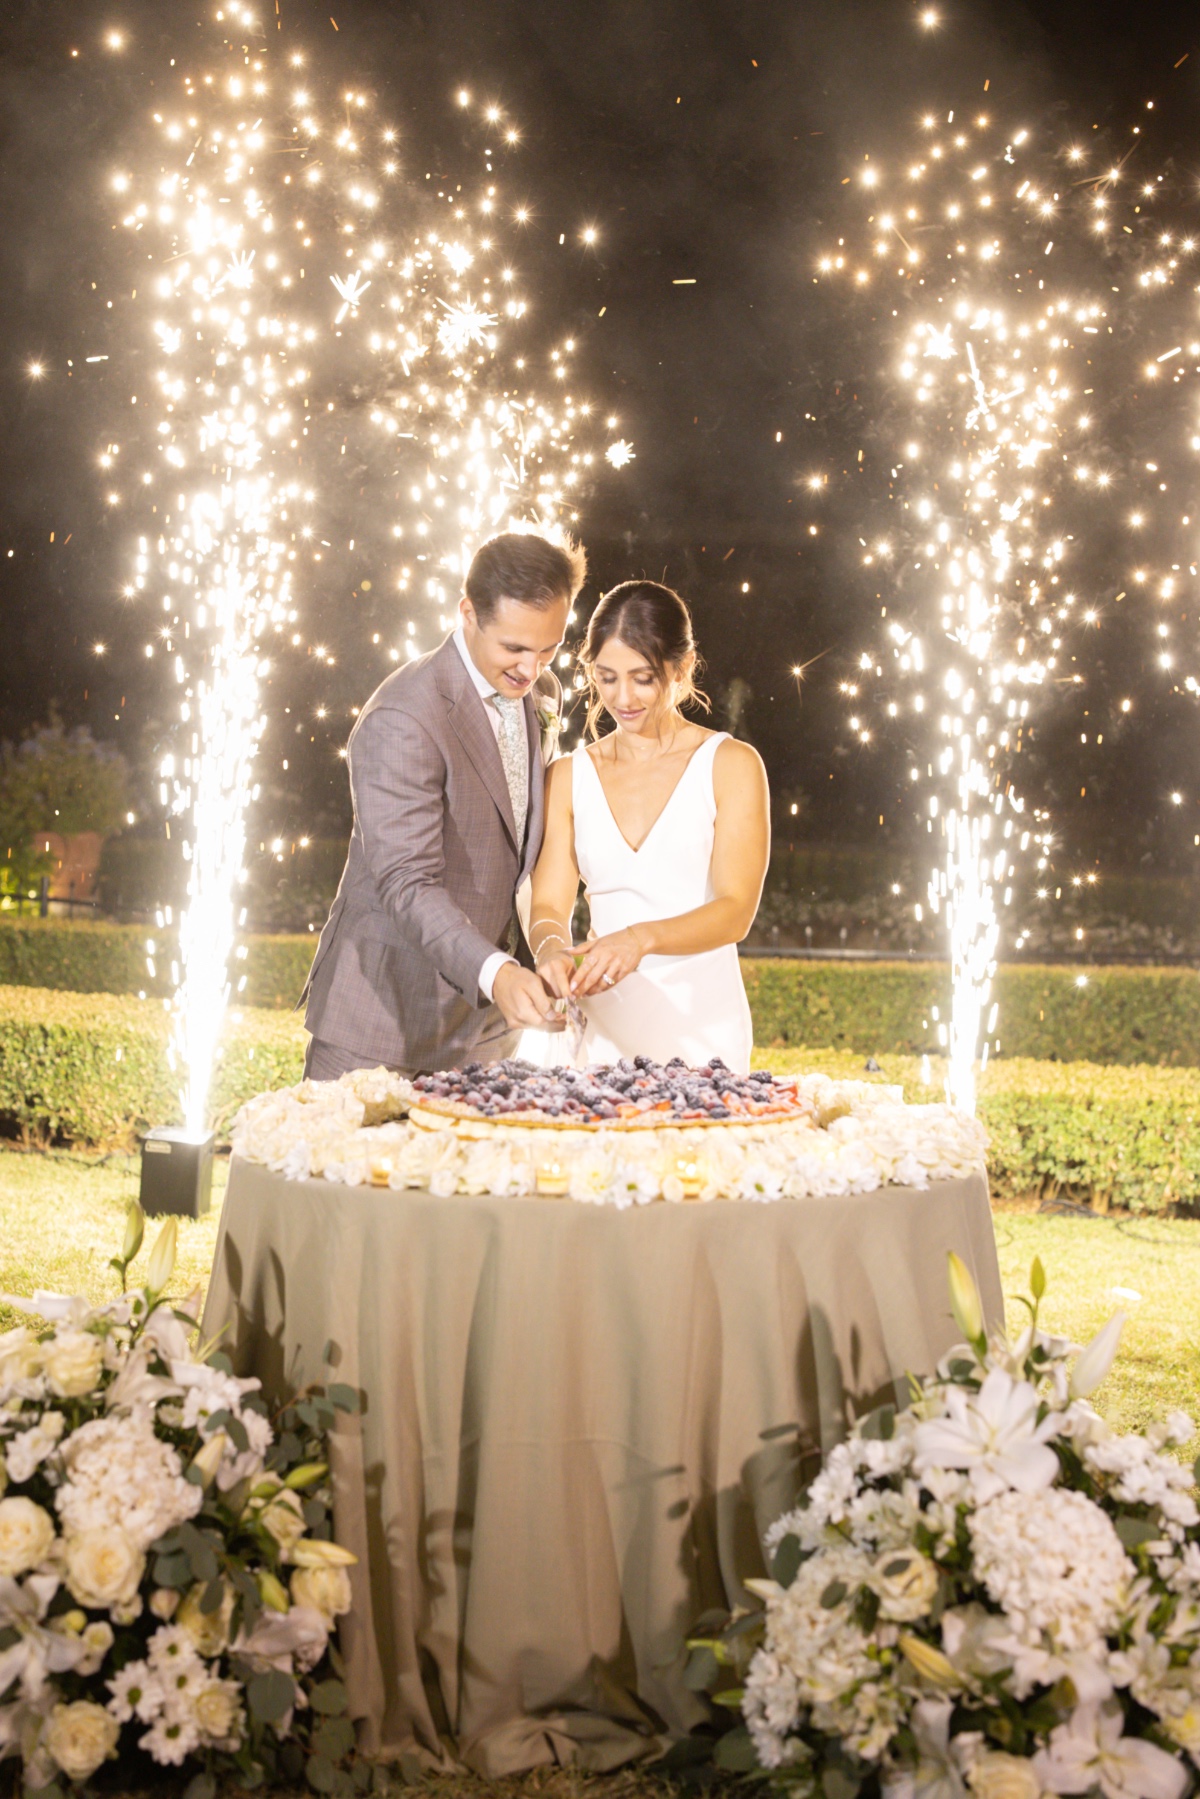 cold sparklers for cake cutting